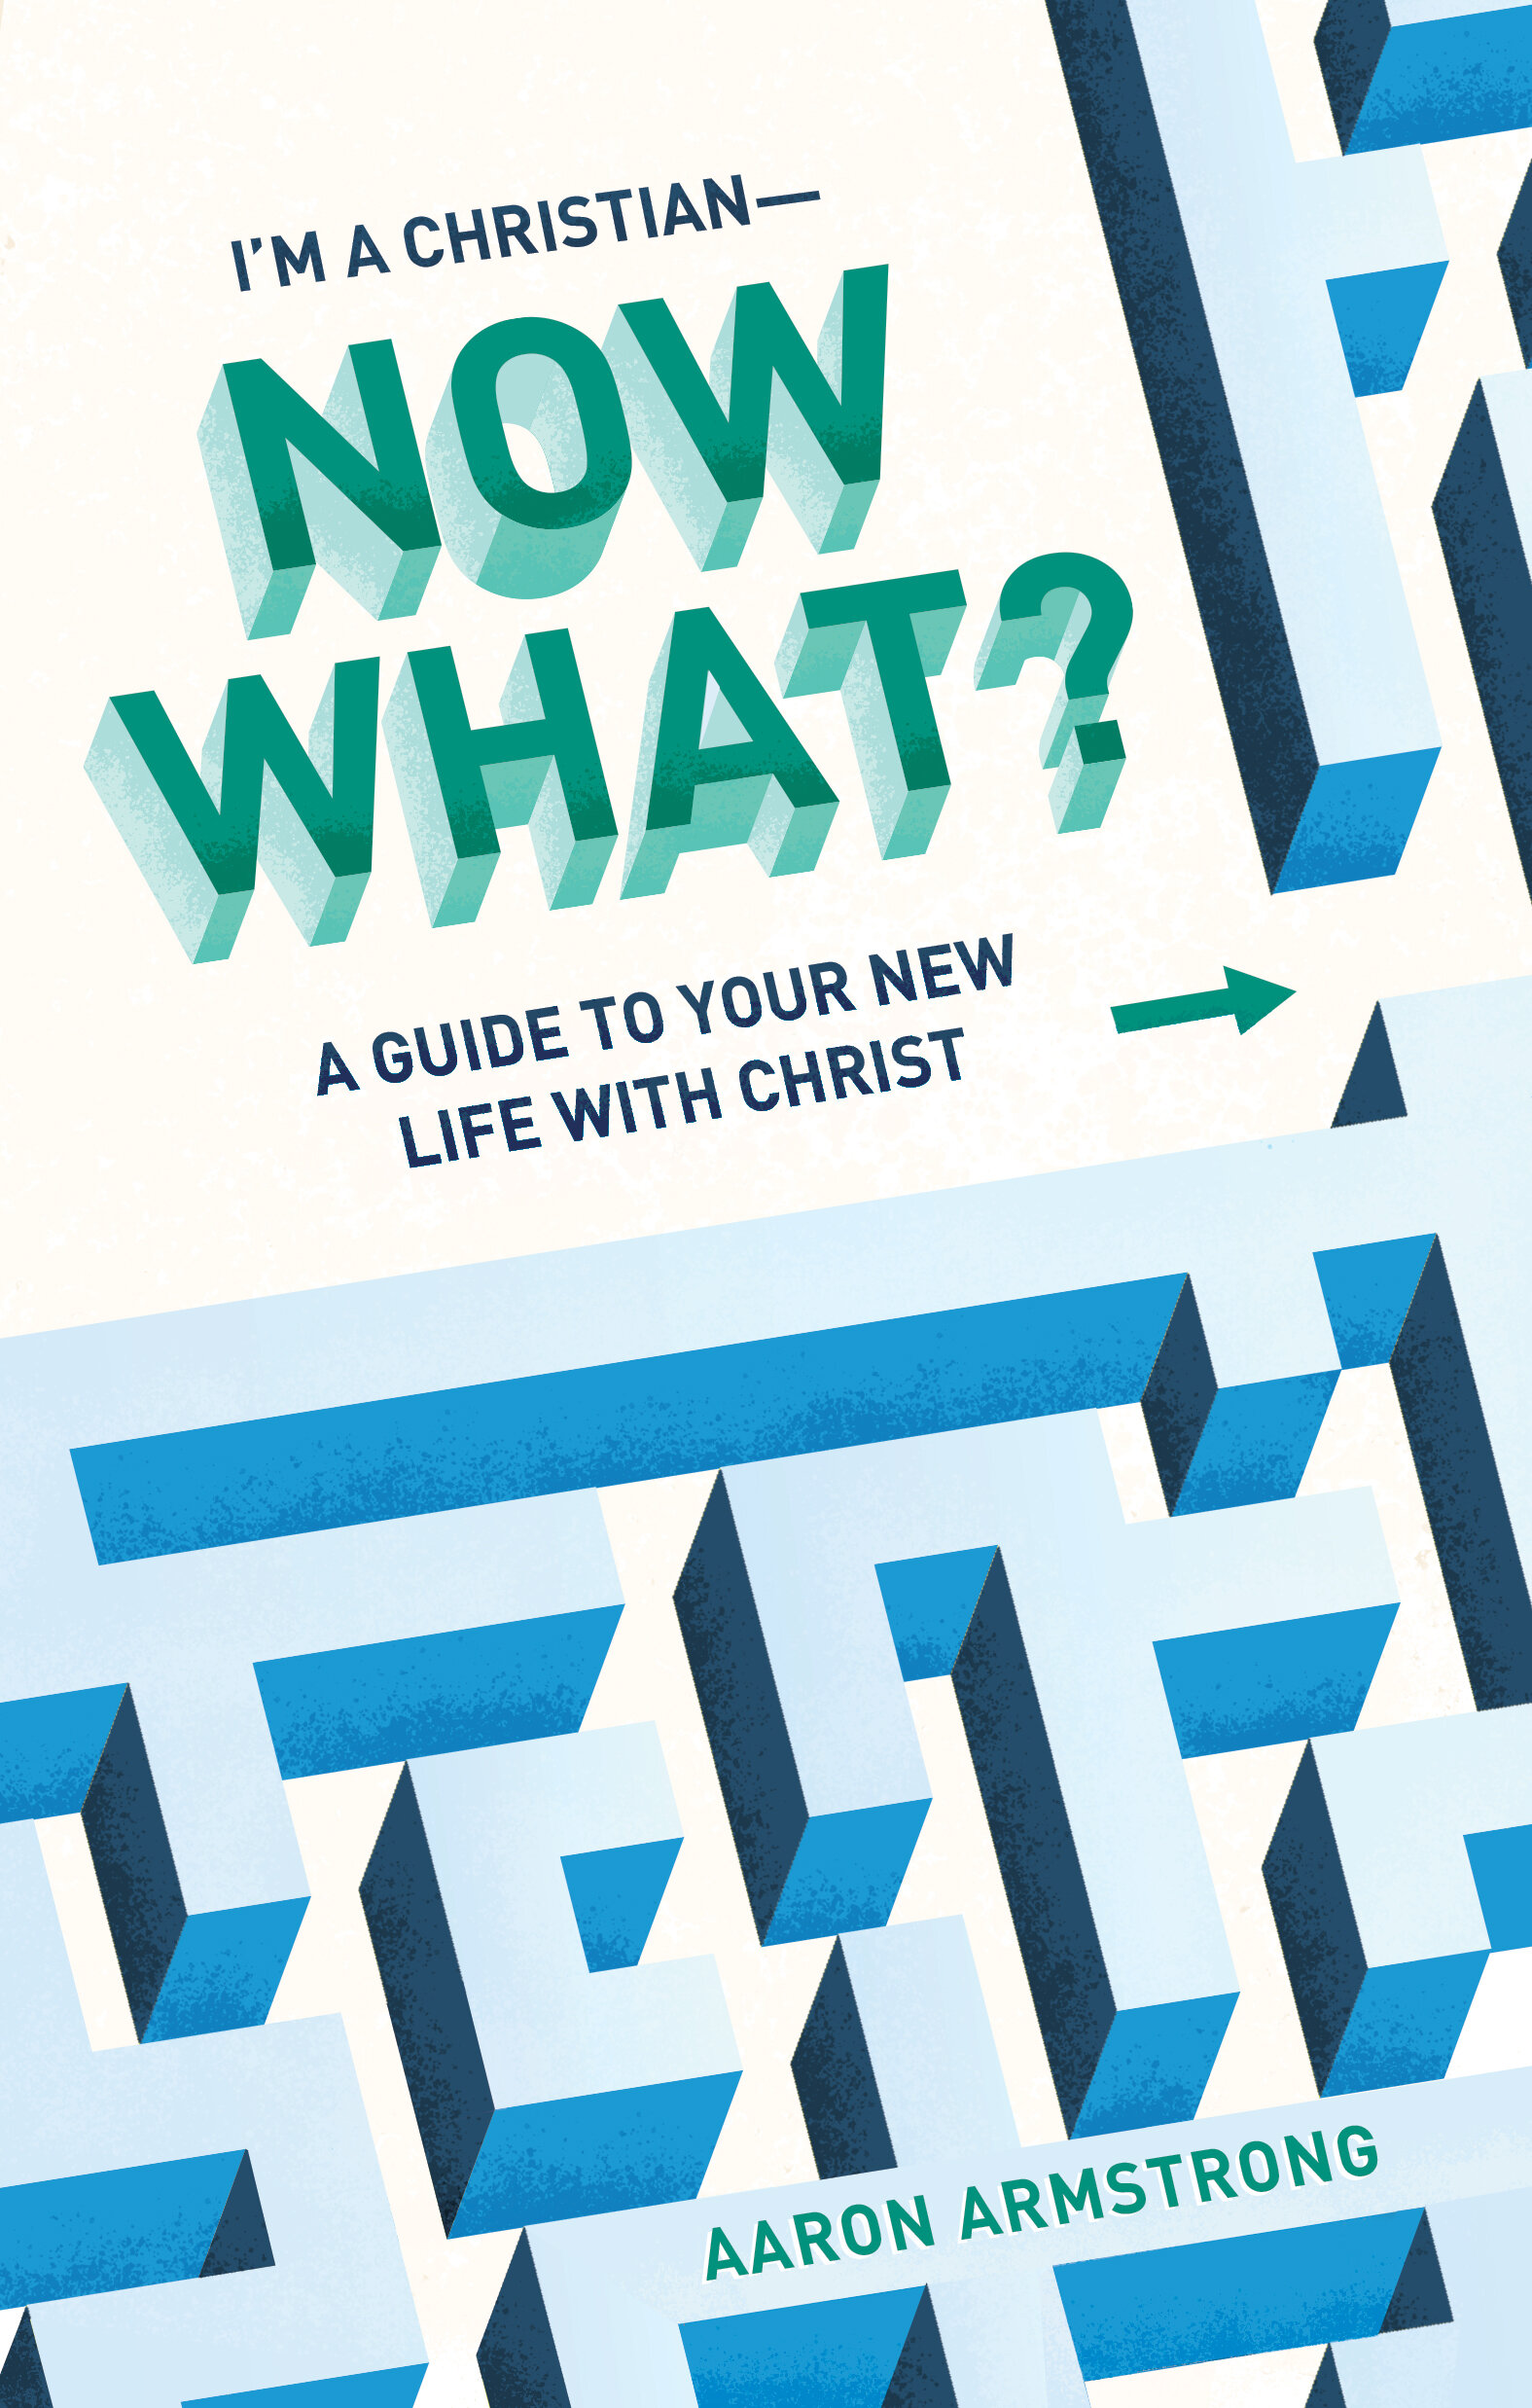 I’m a Christian—Now What? A Guide to Your New Life With Christ